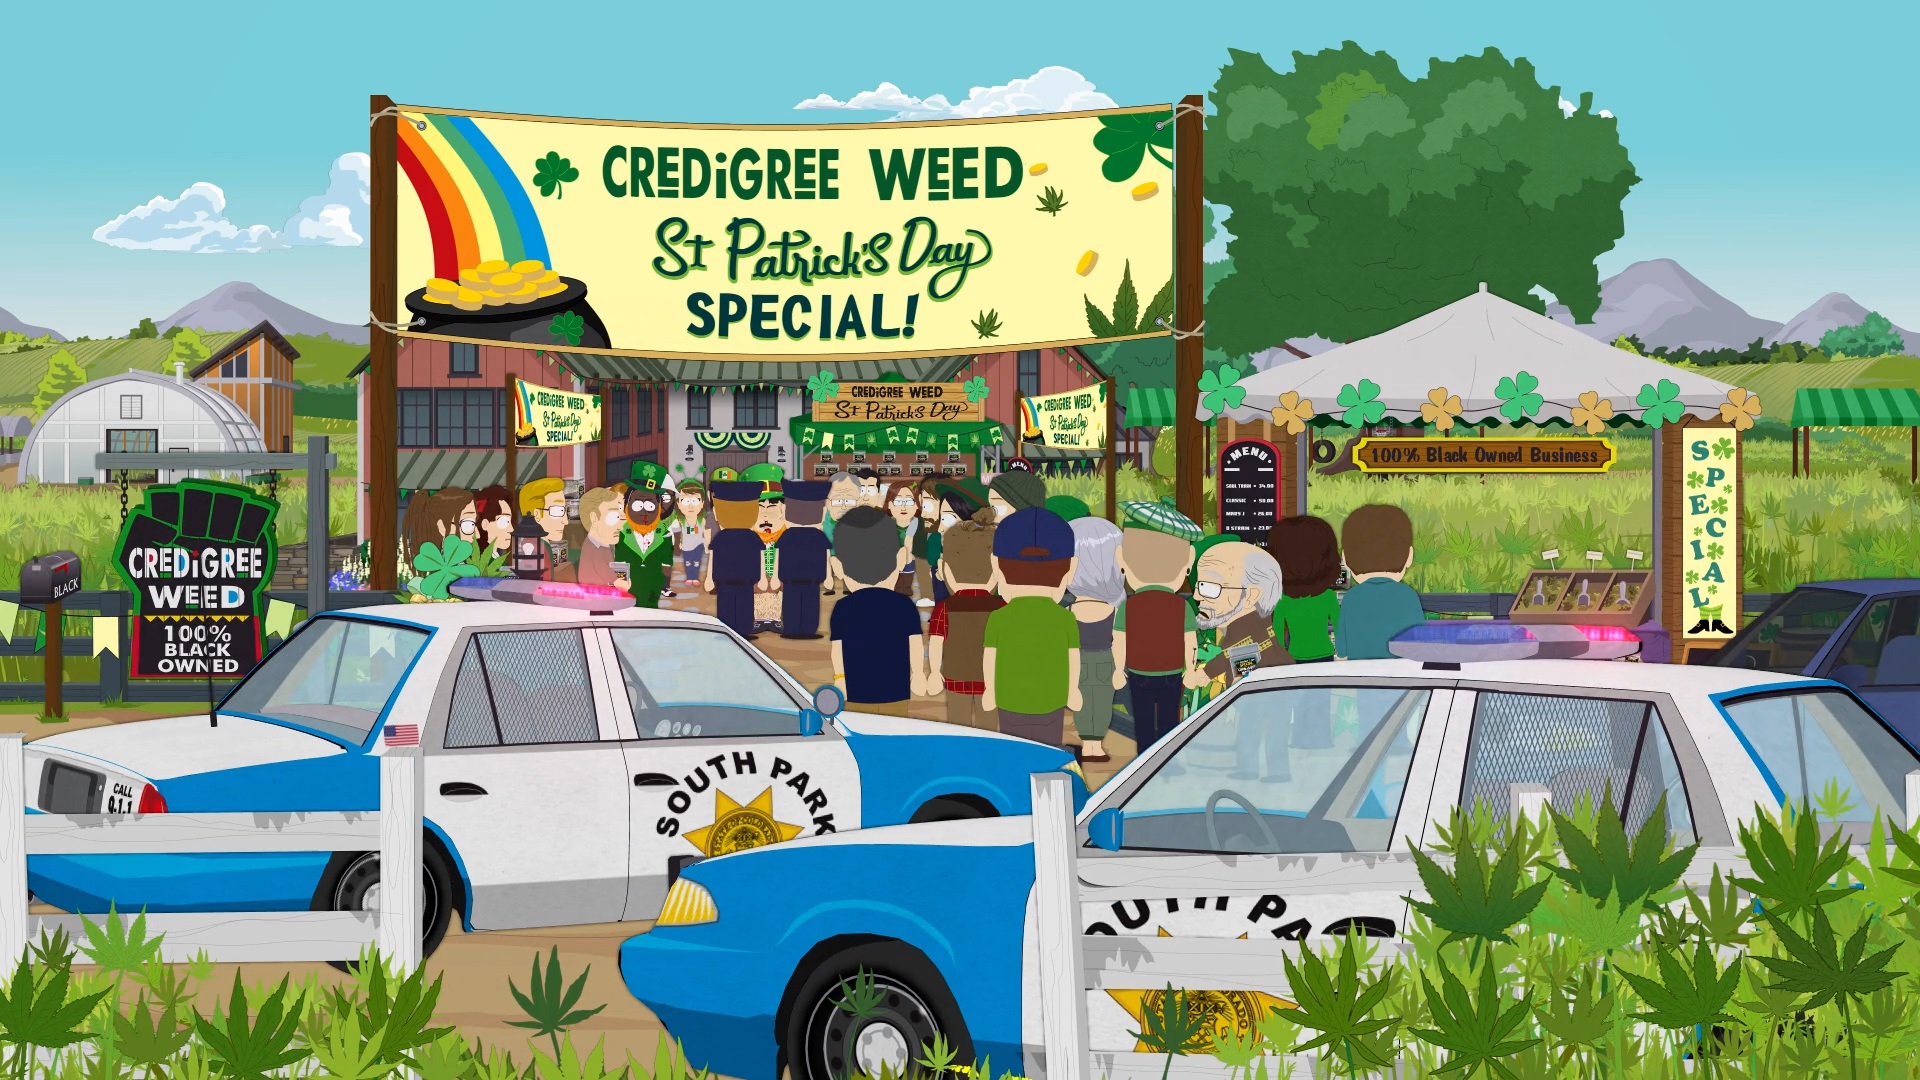 Credigree Weed St. Patrick's Day Special - Seizoen 25 Aflevering 6 - South Park